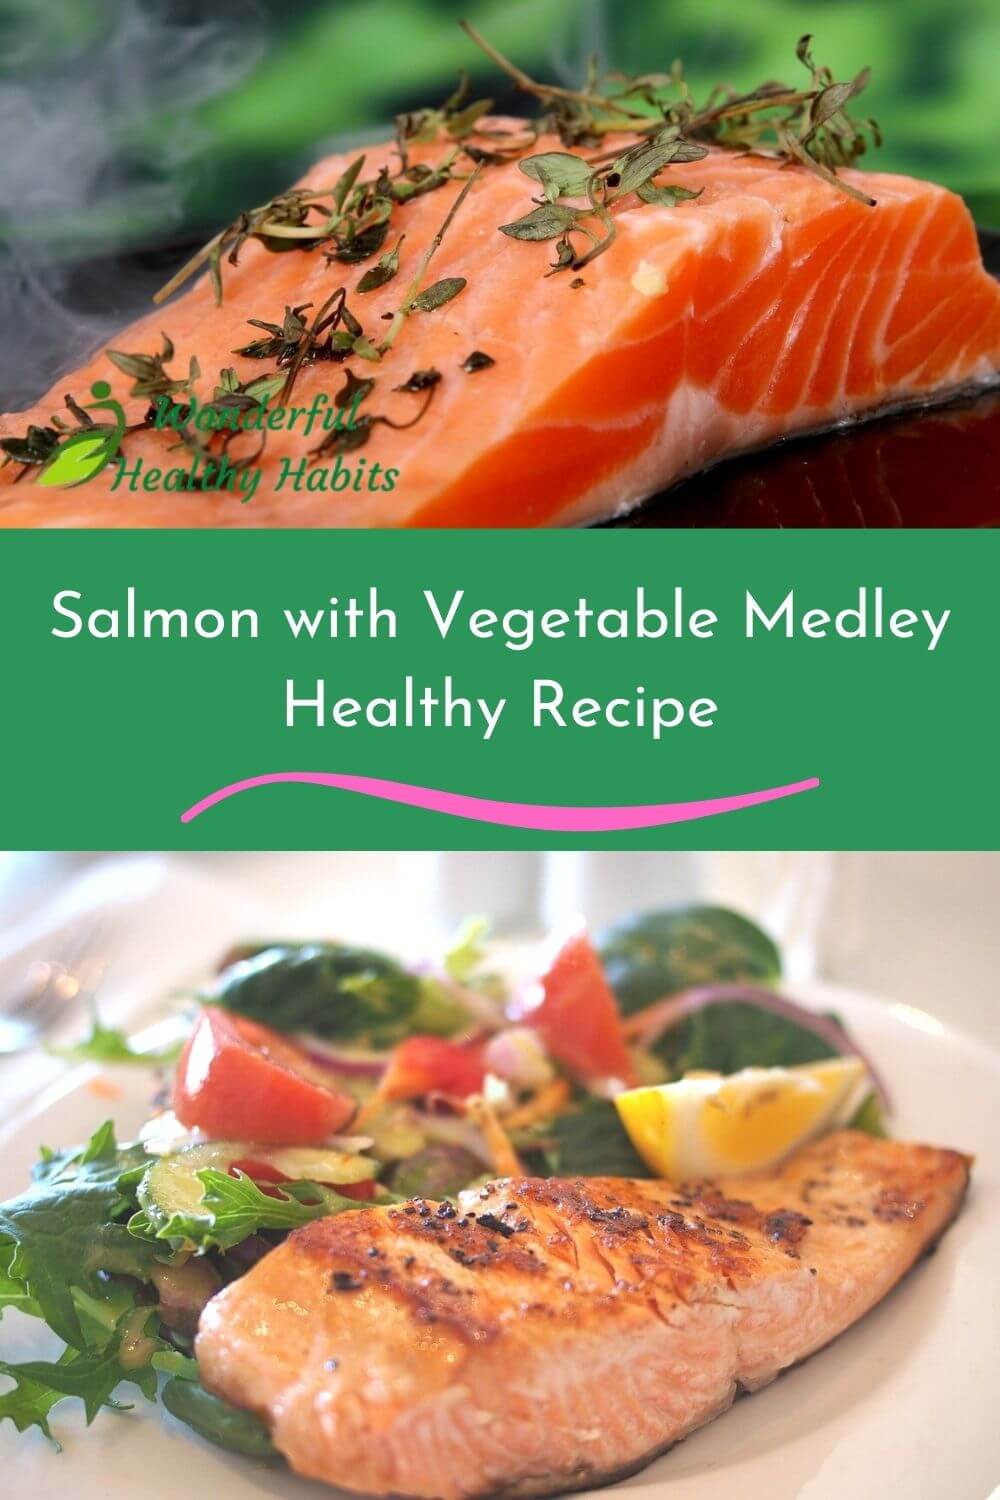 Salmon with Vegetable Medley Healthy Recipes